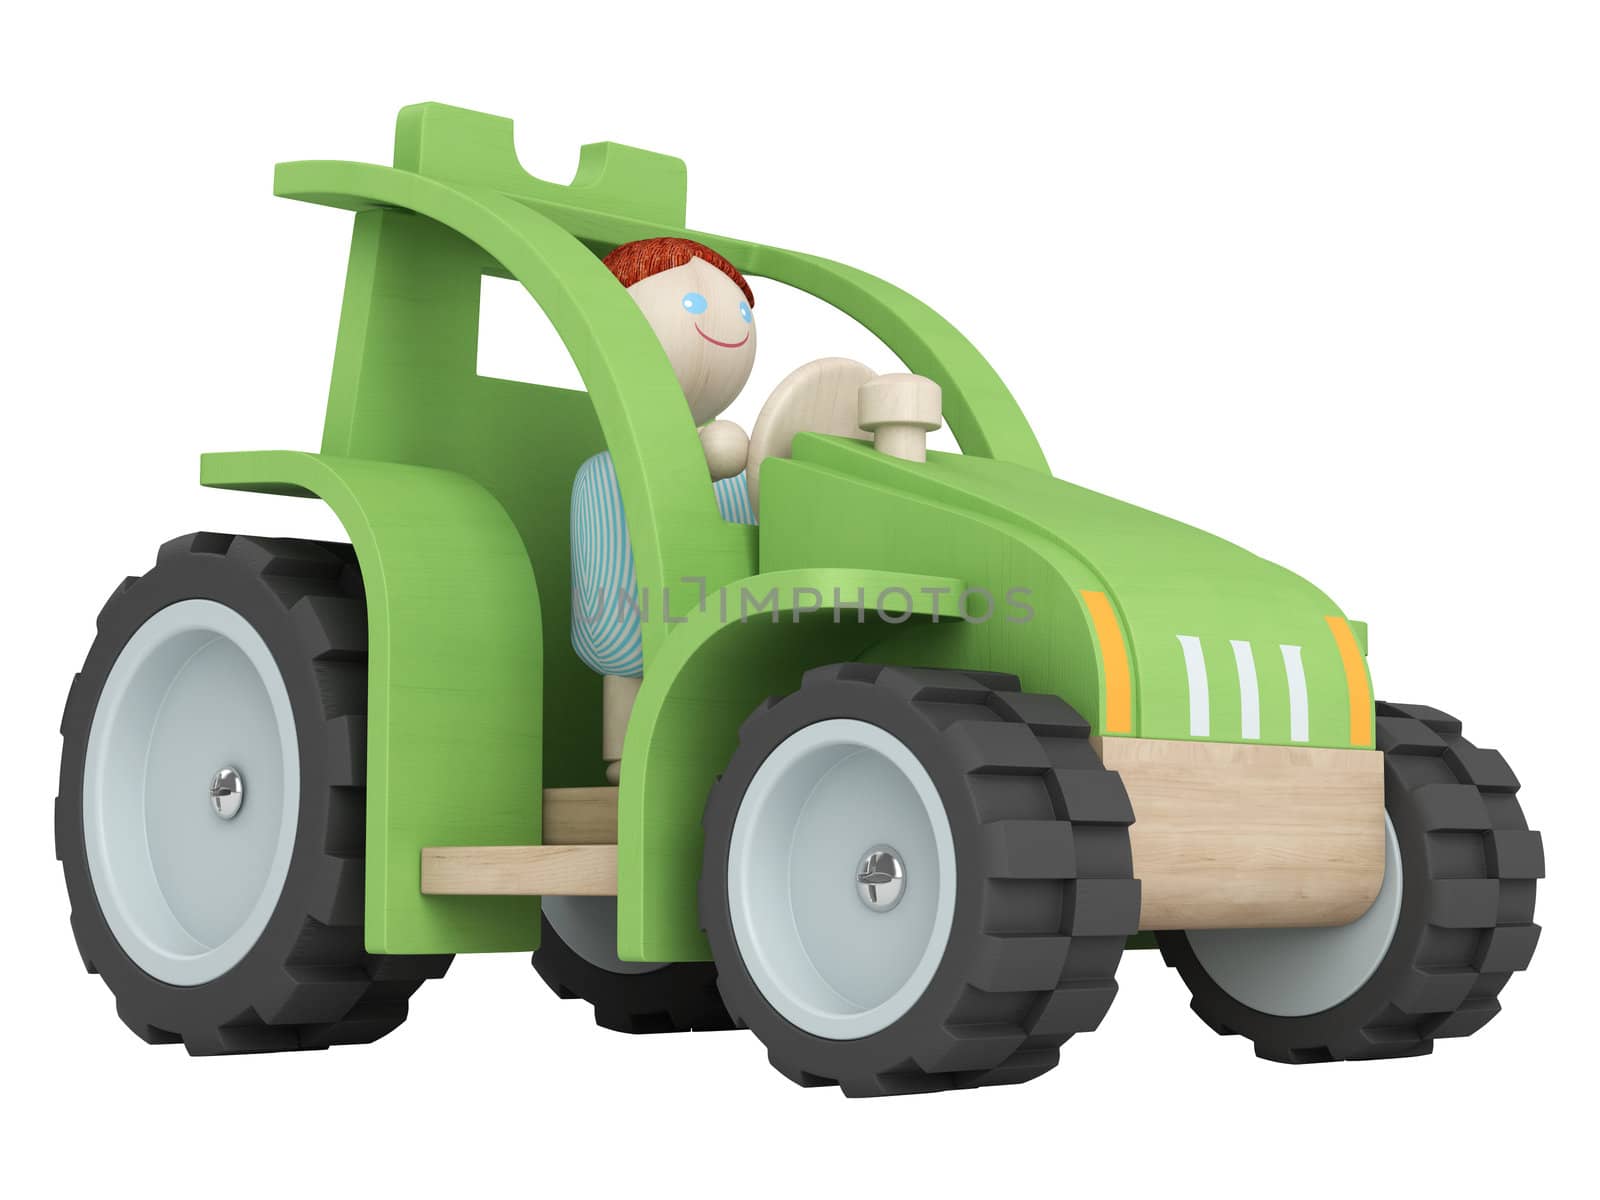 Toy farmer with his tractor by AlexanderMorozov